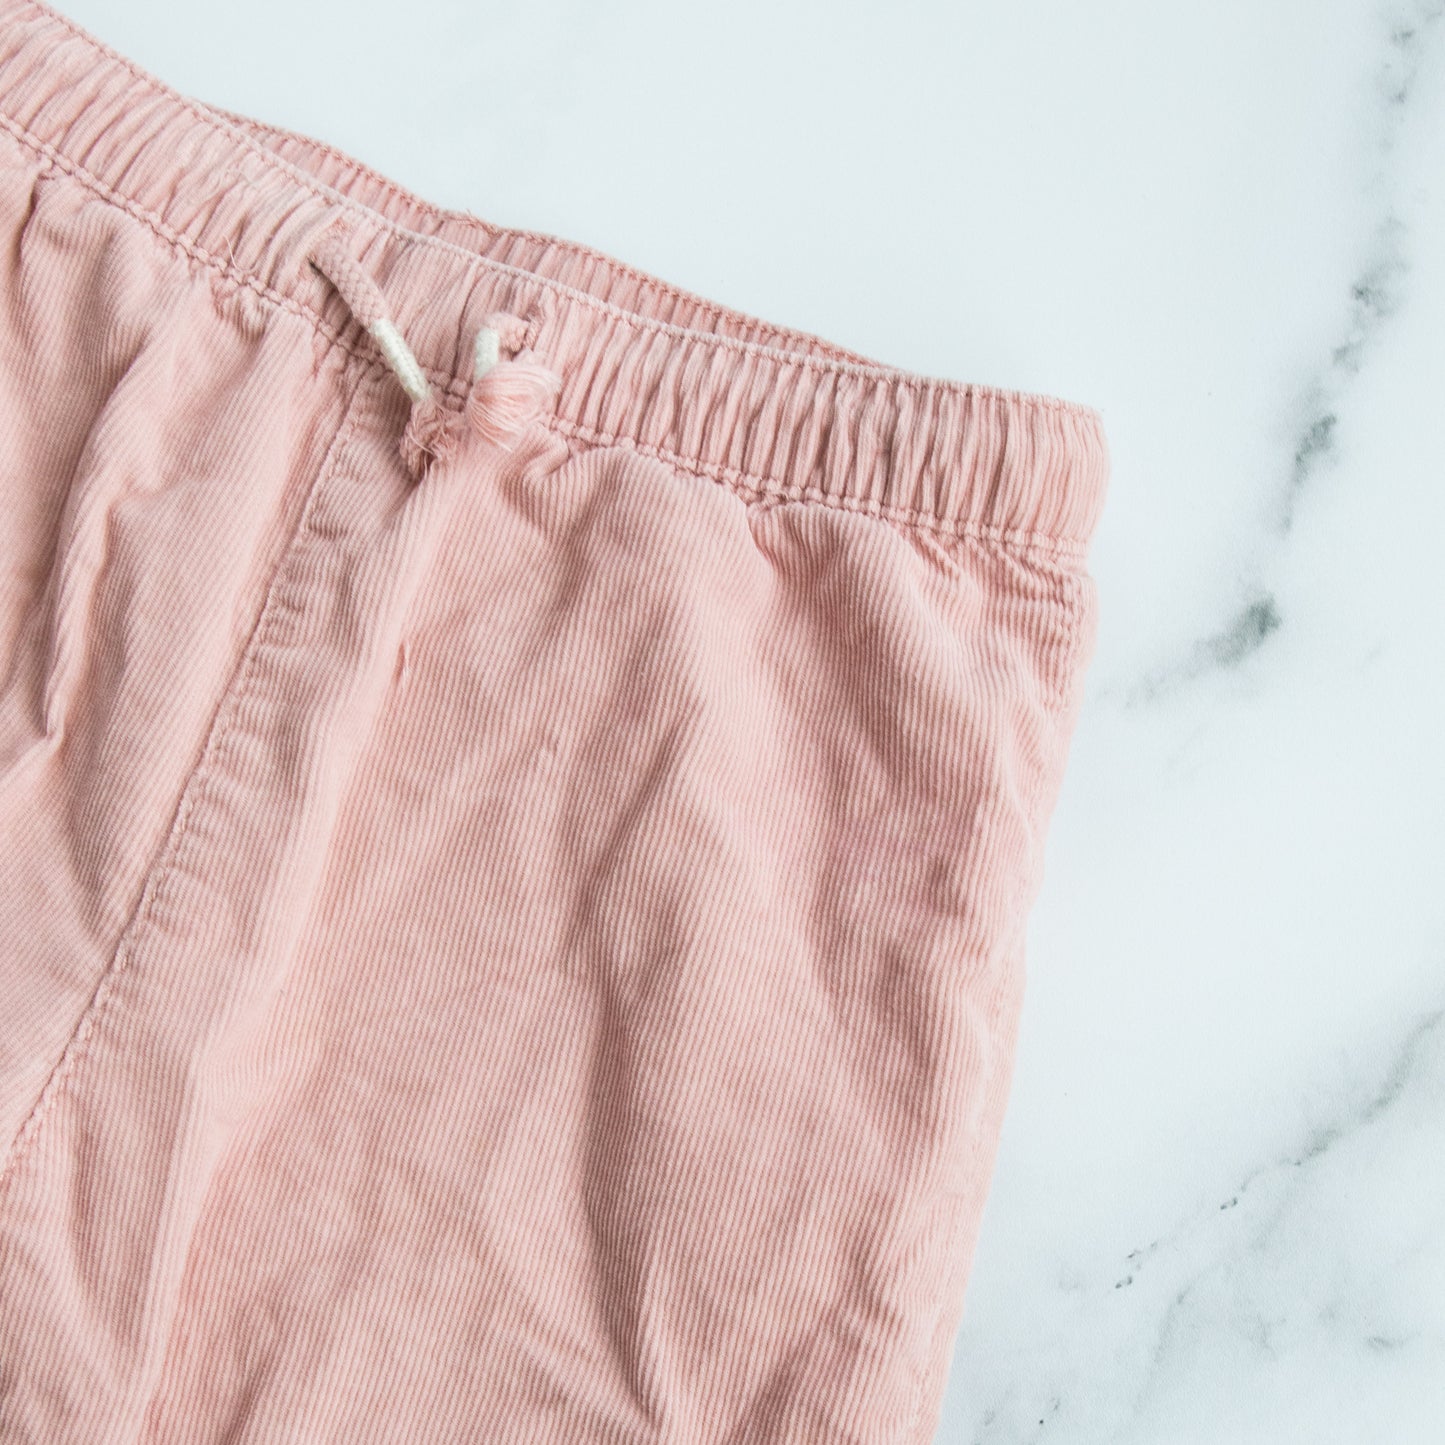 H&M Pink Suade Trousers (12-18M)